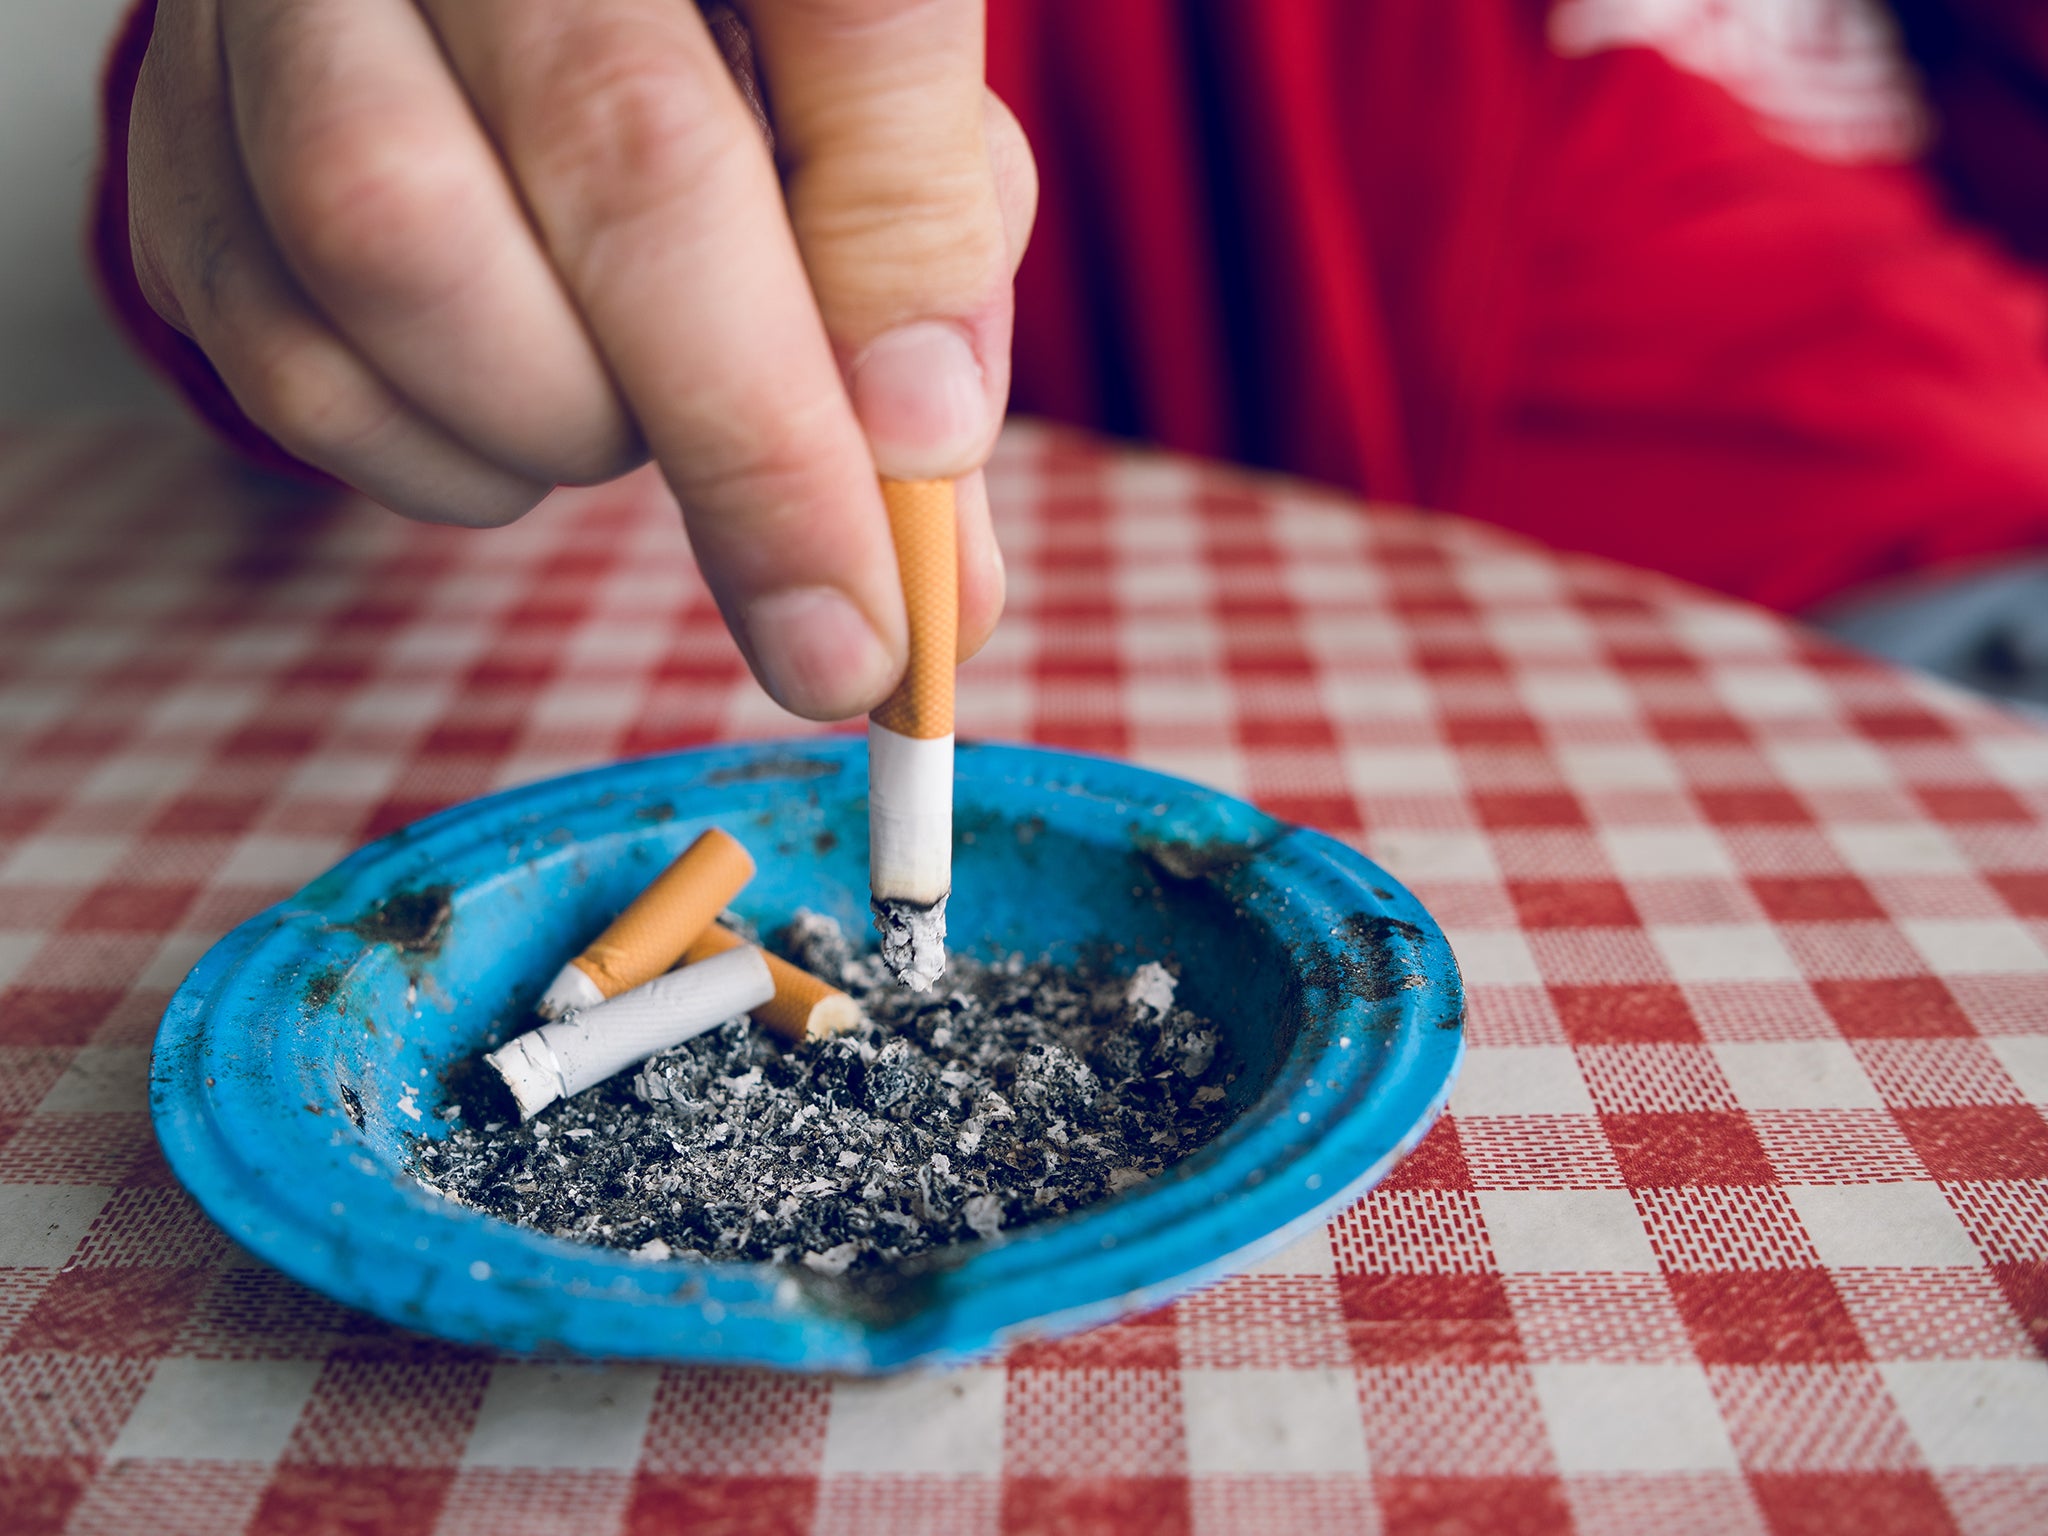 Stub it out: the future looks brighter with a big drop in smoking-related deaths for people aged around 50